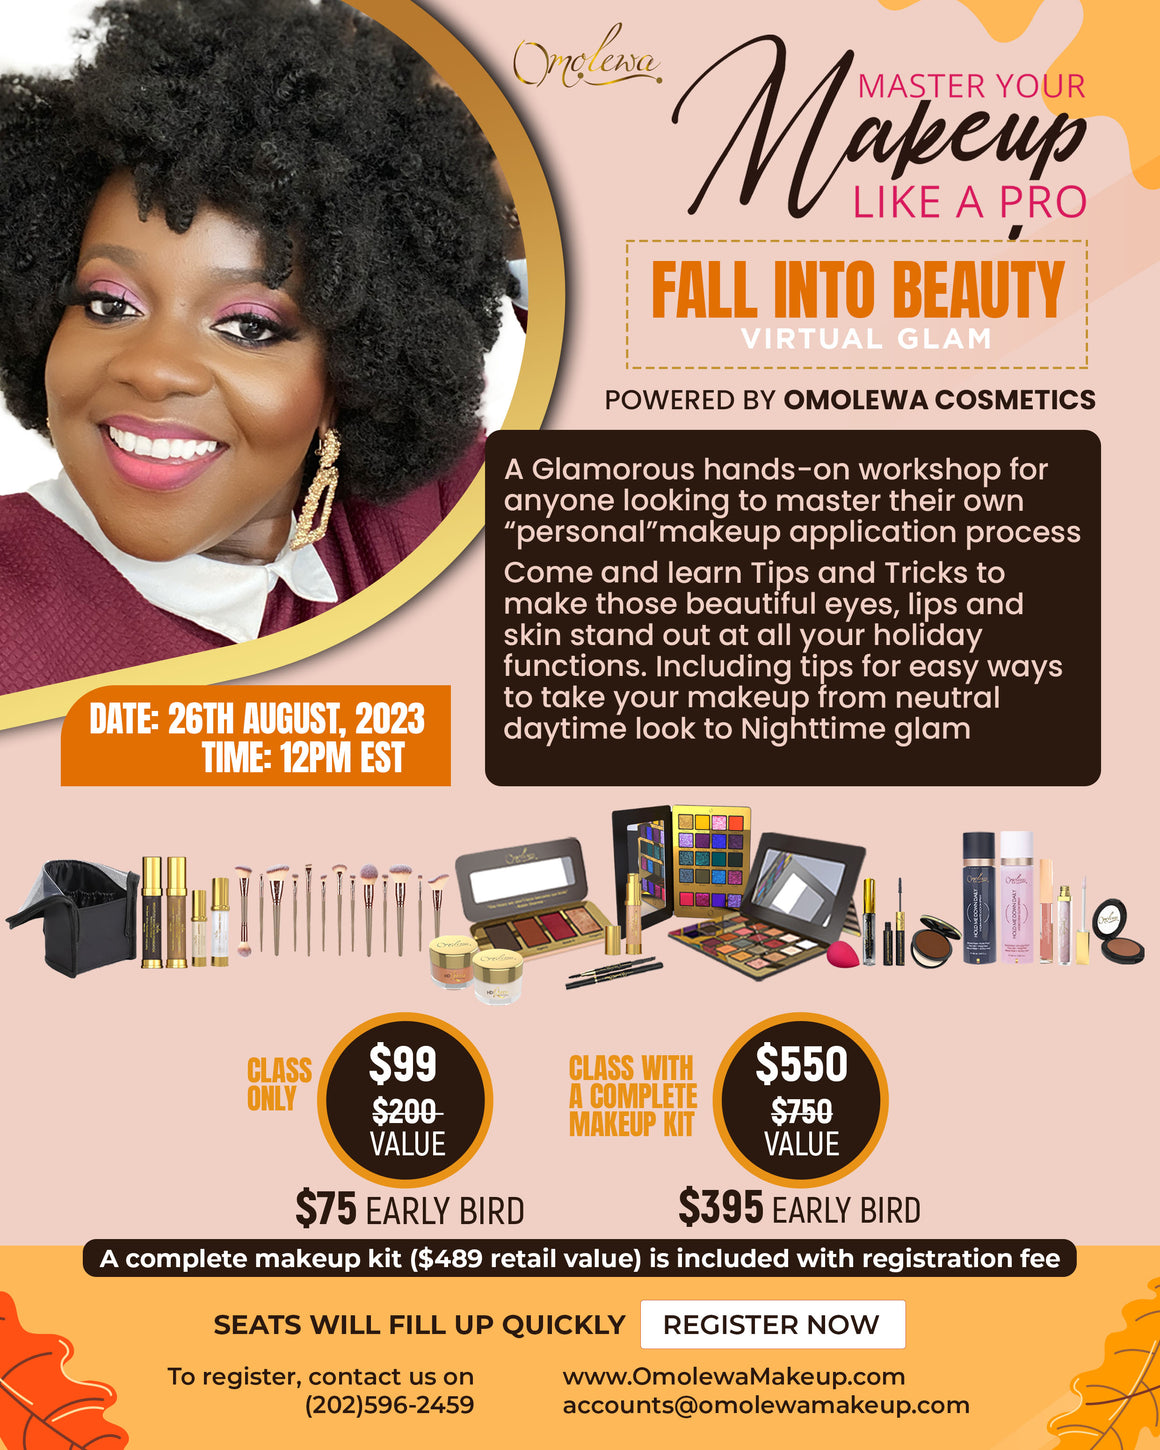 Master Your Makeup Like A Pro Class: NEW YEAR, NEW GLAM (Jan 21st 2023) Omolewa Makeup